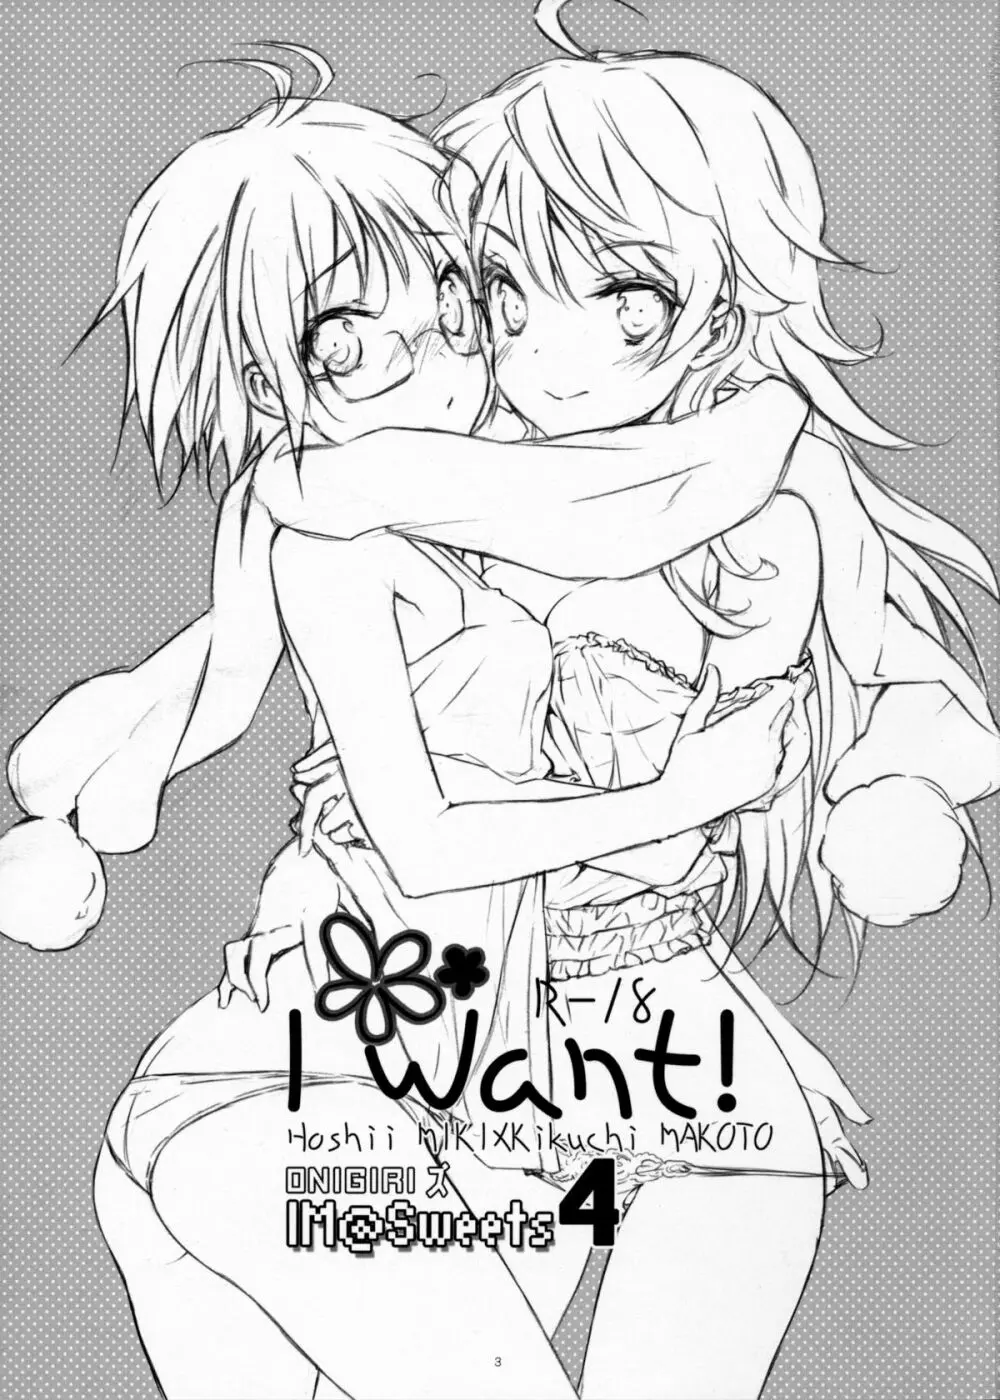 IM@SWEETS 4 I WANT 2ページ